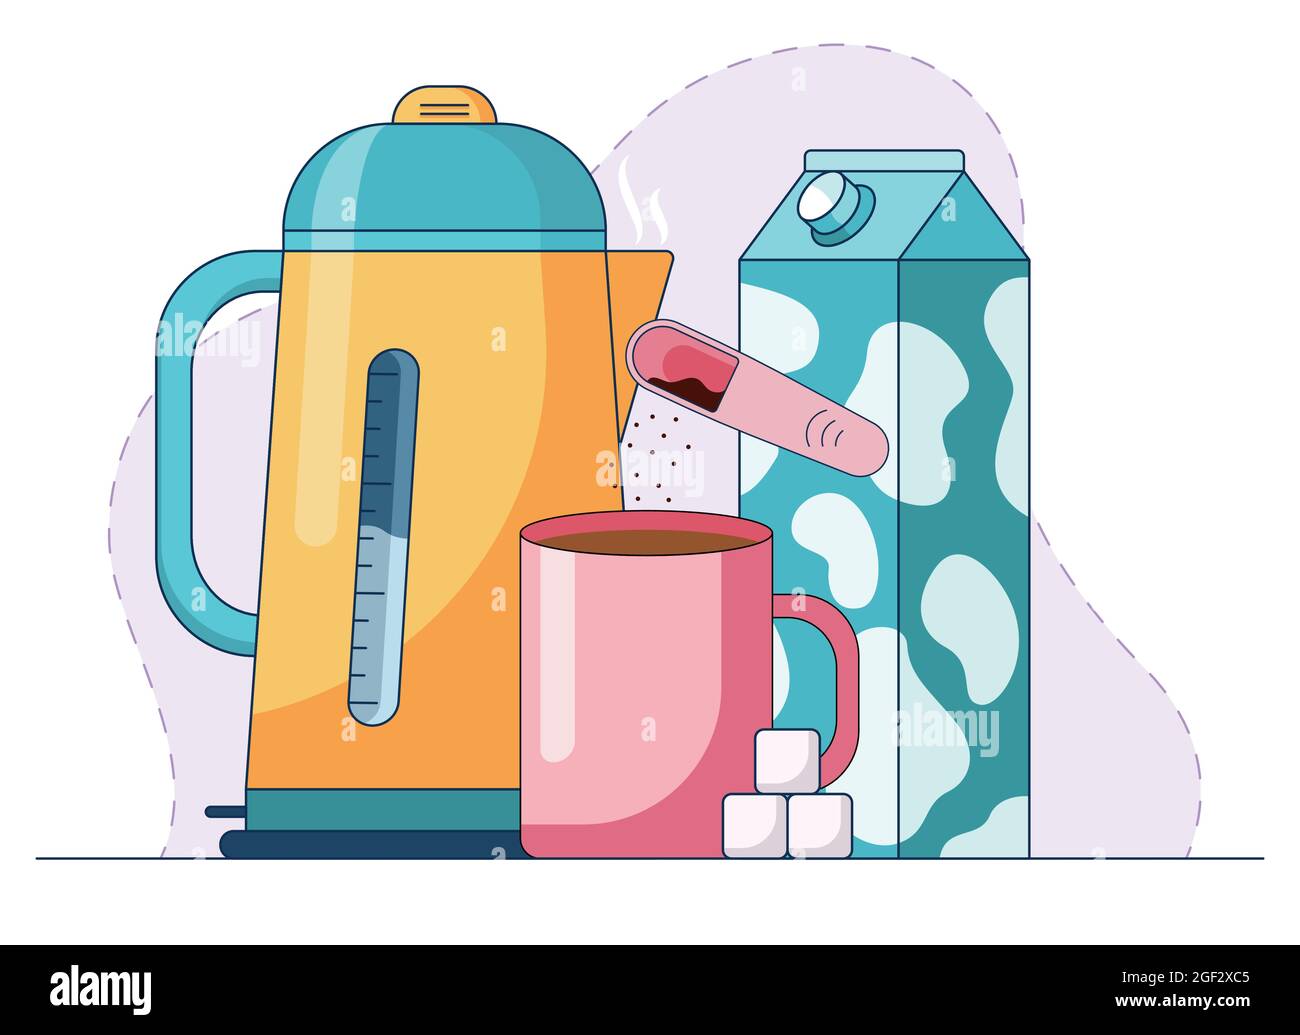 https://c8.alamy.com/comp/2GF2XC5/mug-with-hot-drink-made-by-instant-coffee-sugar-cubes-and-milk-in-front-of-coffee-pot-with-boiling-water-cartoon-vector-illustration-in-a-flat-style-2GF2XC5.jpg